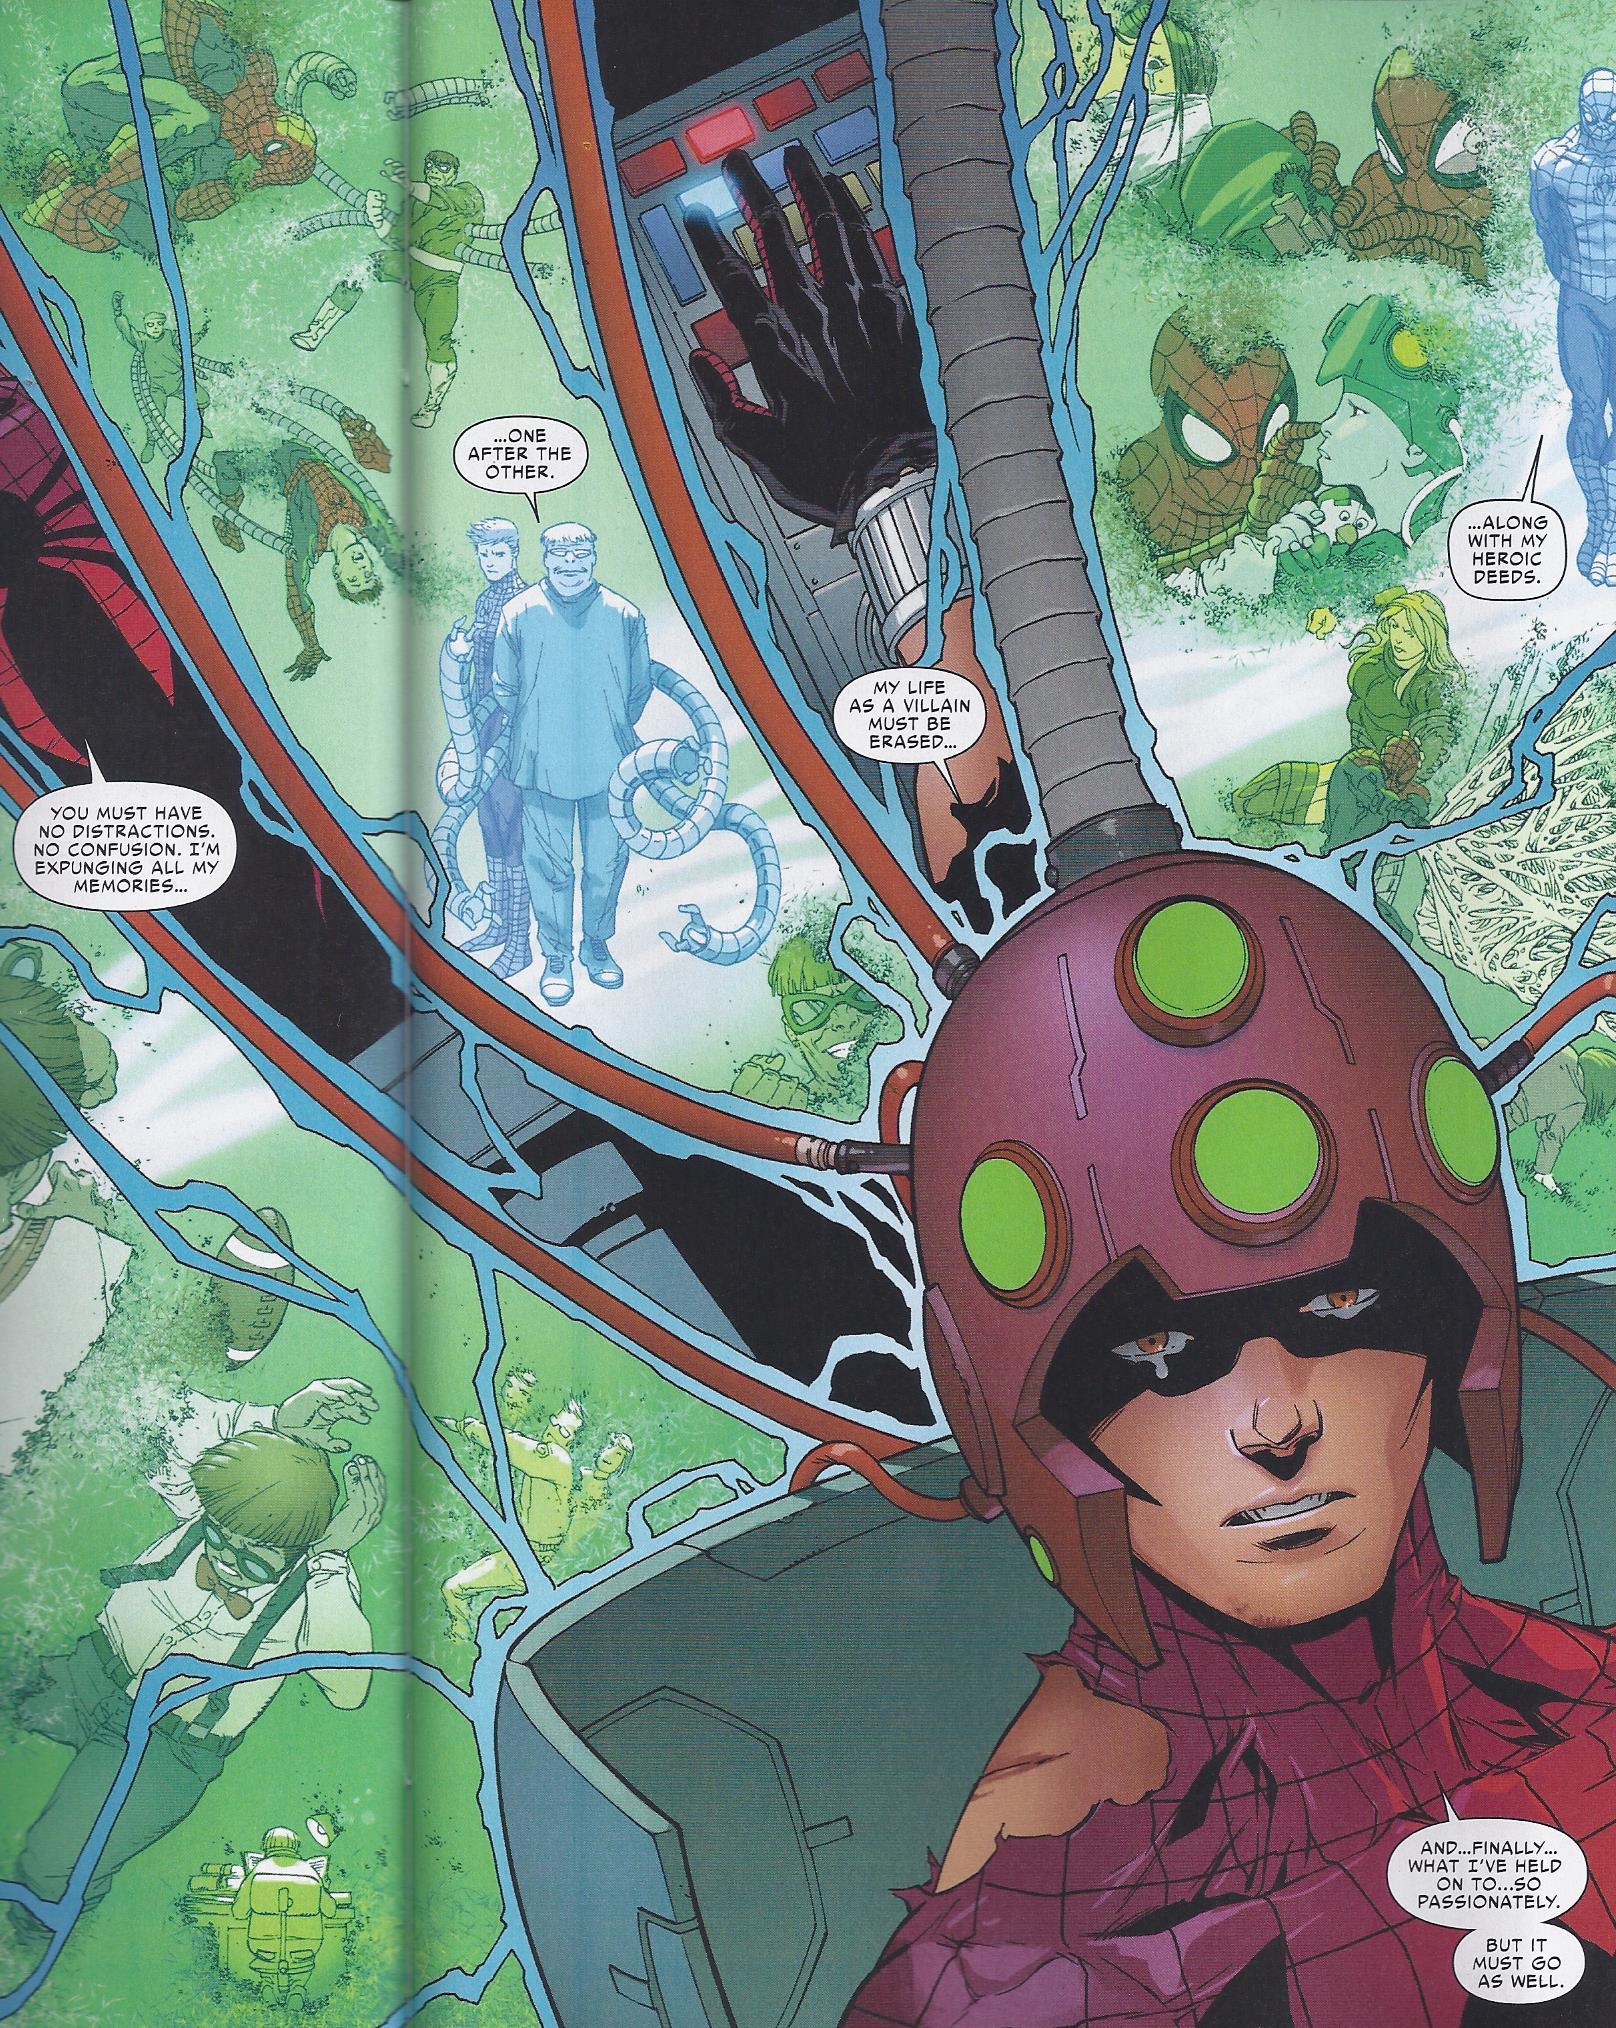 Superior-Spider-Man-30-Spoilers-Peter-Pa